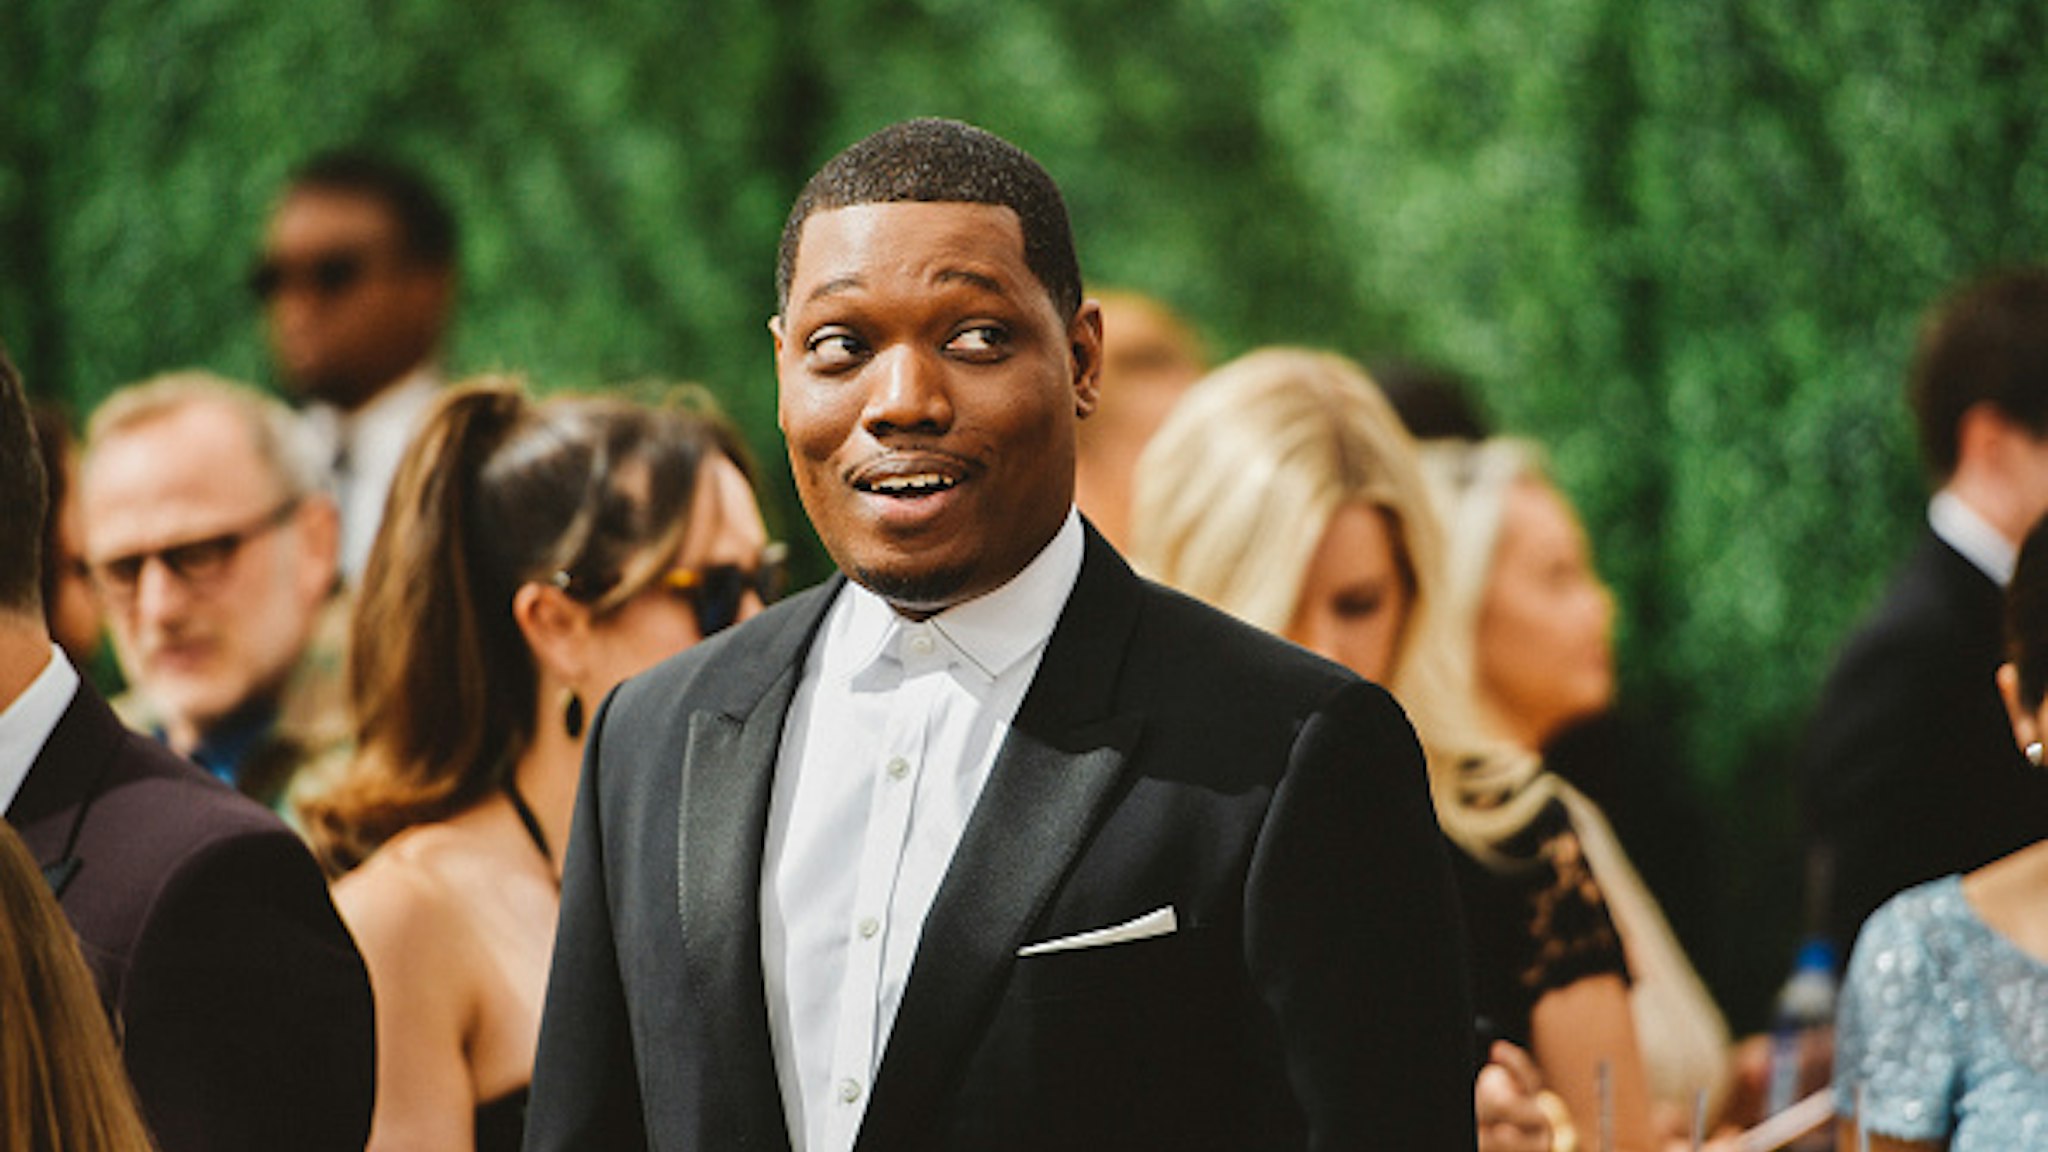 LOS ANGELES, CA - SEPTEMBER 17: (EDITORS NOTE: Image has been digitally enhanced) Michael Che arrives at the 70th Emmy Awards on September 17, 2018 in Los Angeles, California.